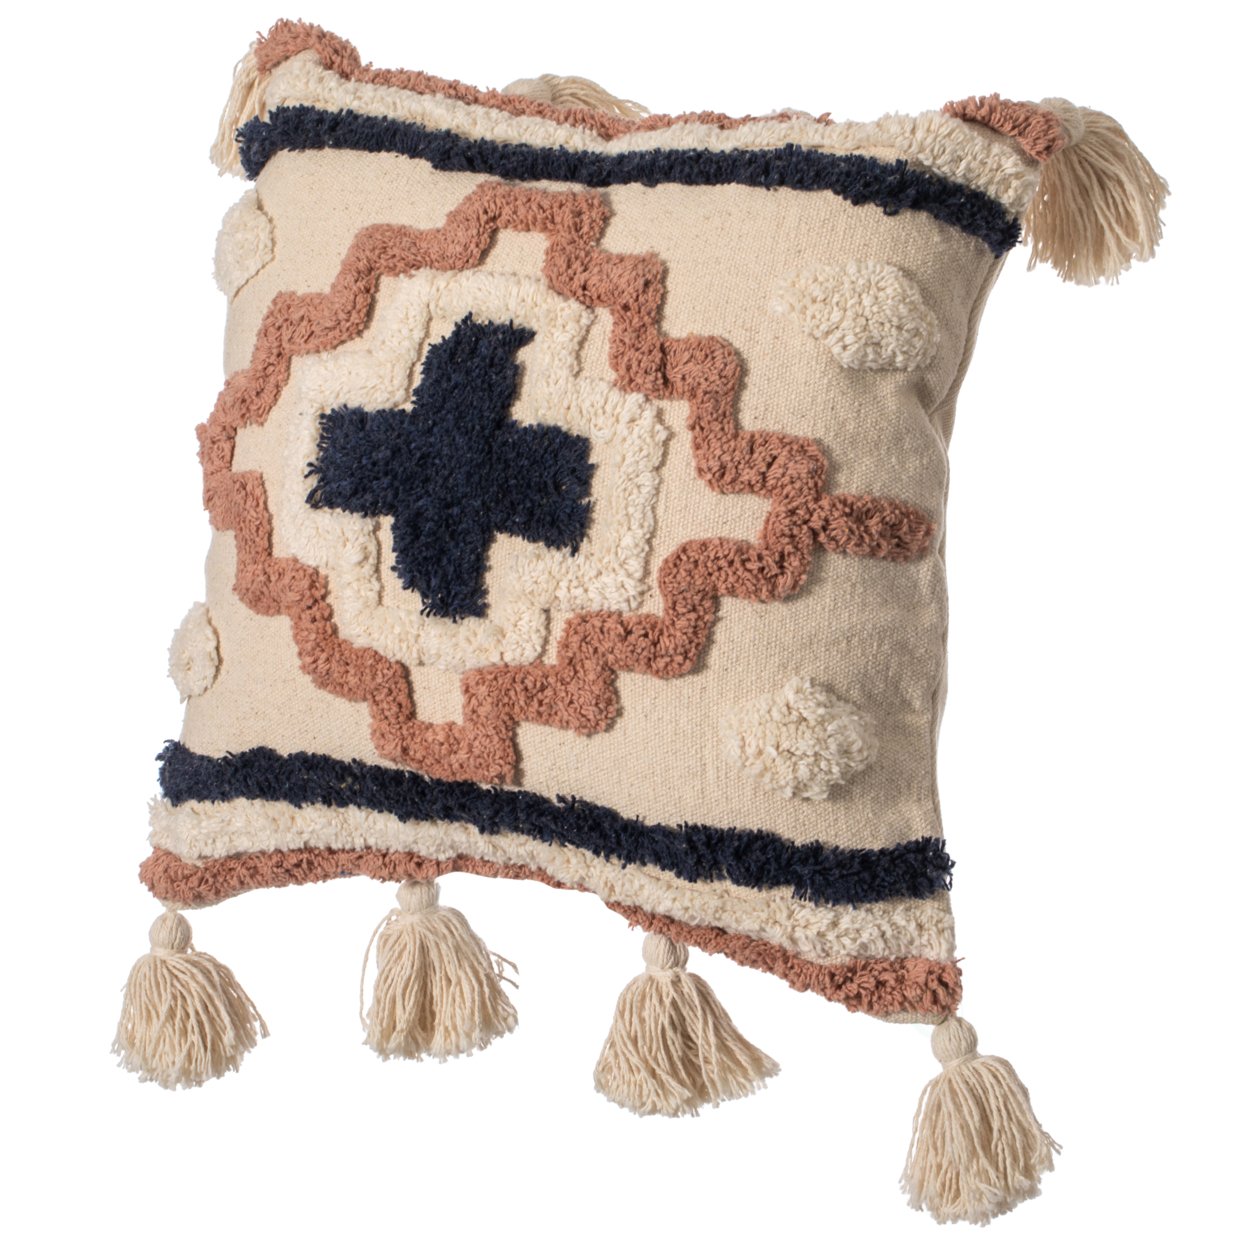 16 Handwoven Cotton Throw Pillow Cover With Tufted Designs And Side Tassels - Line With Cushion